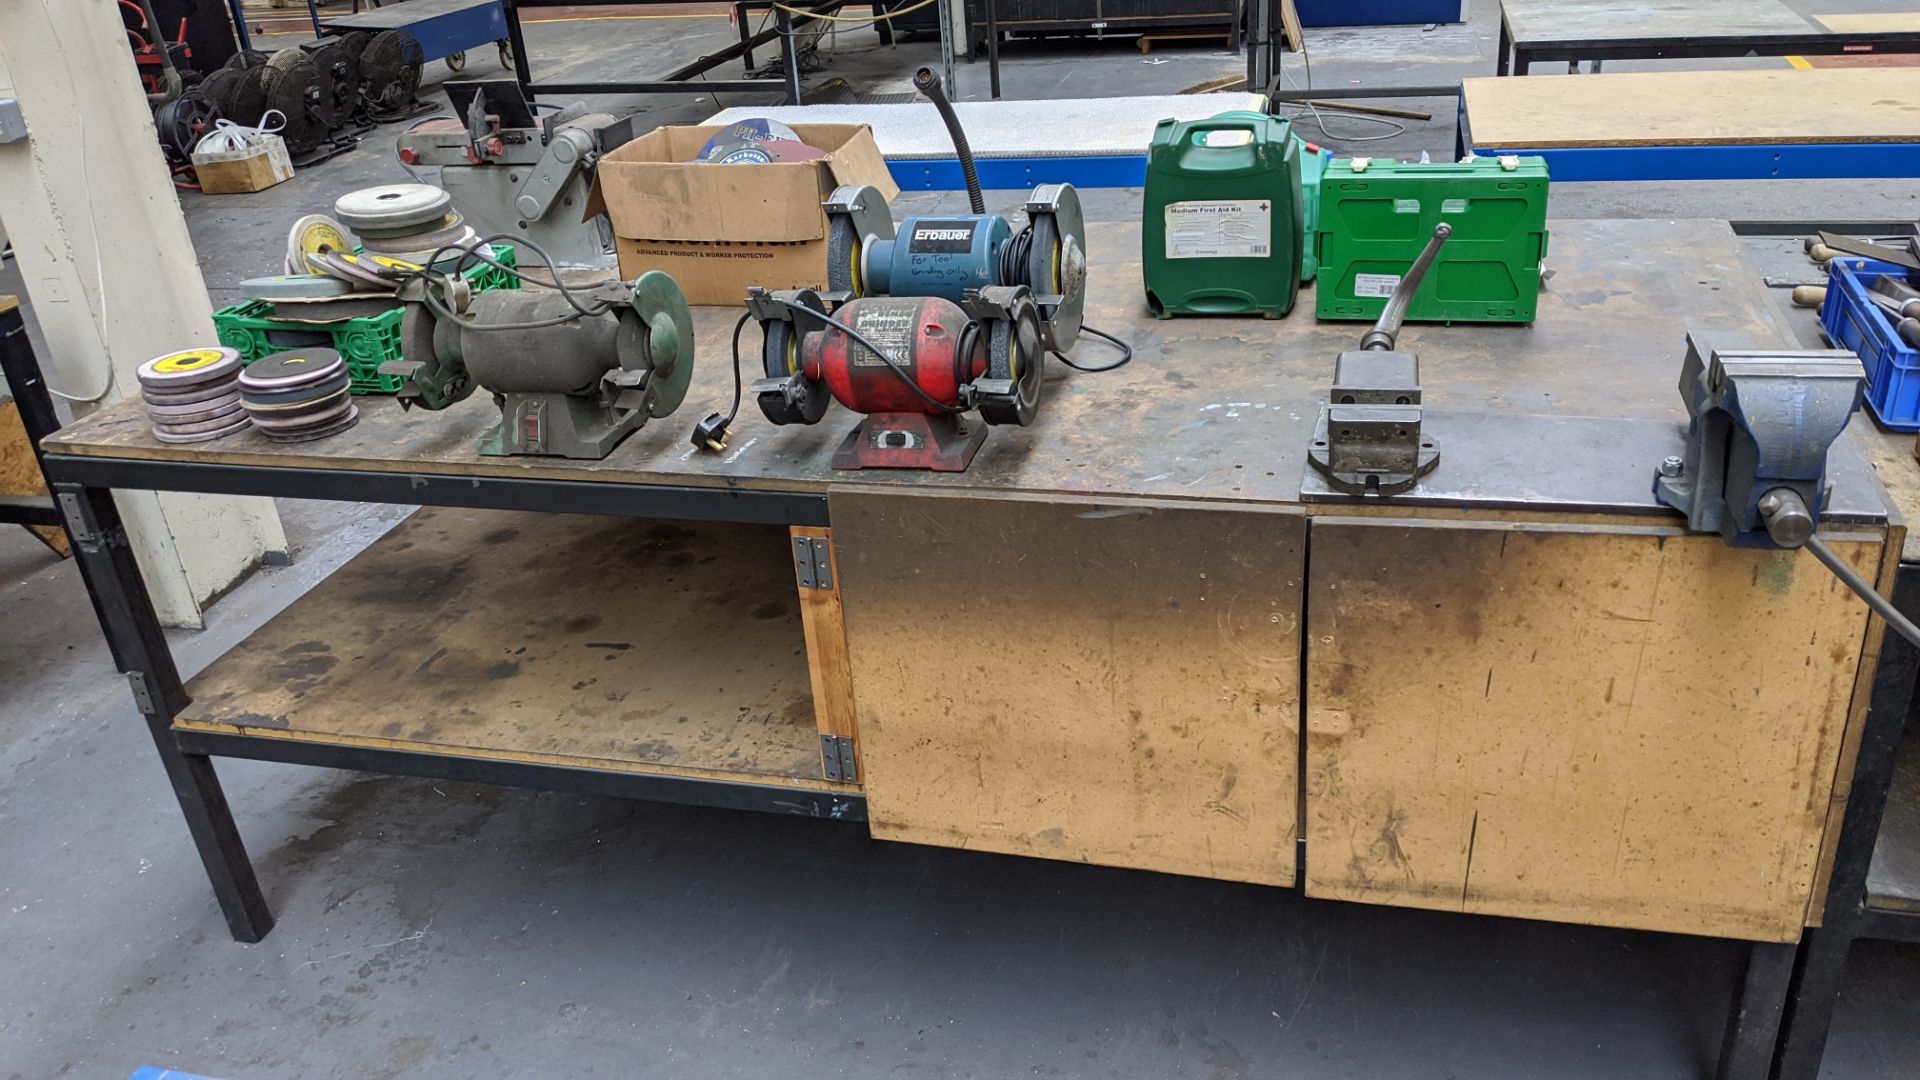 Table & contents including vices, sets of twin grinding wheels, linishing belt, consumables, first